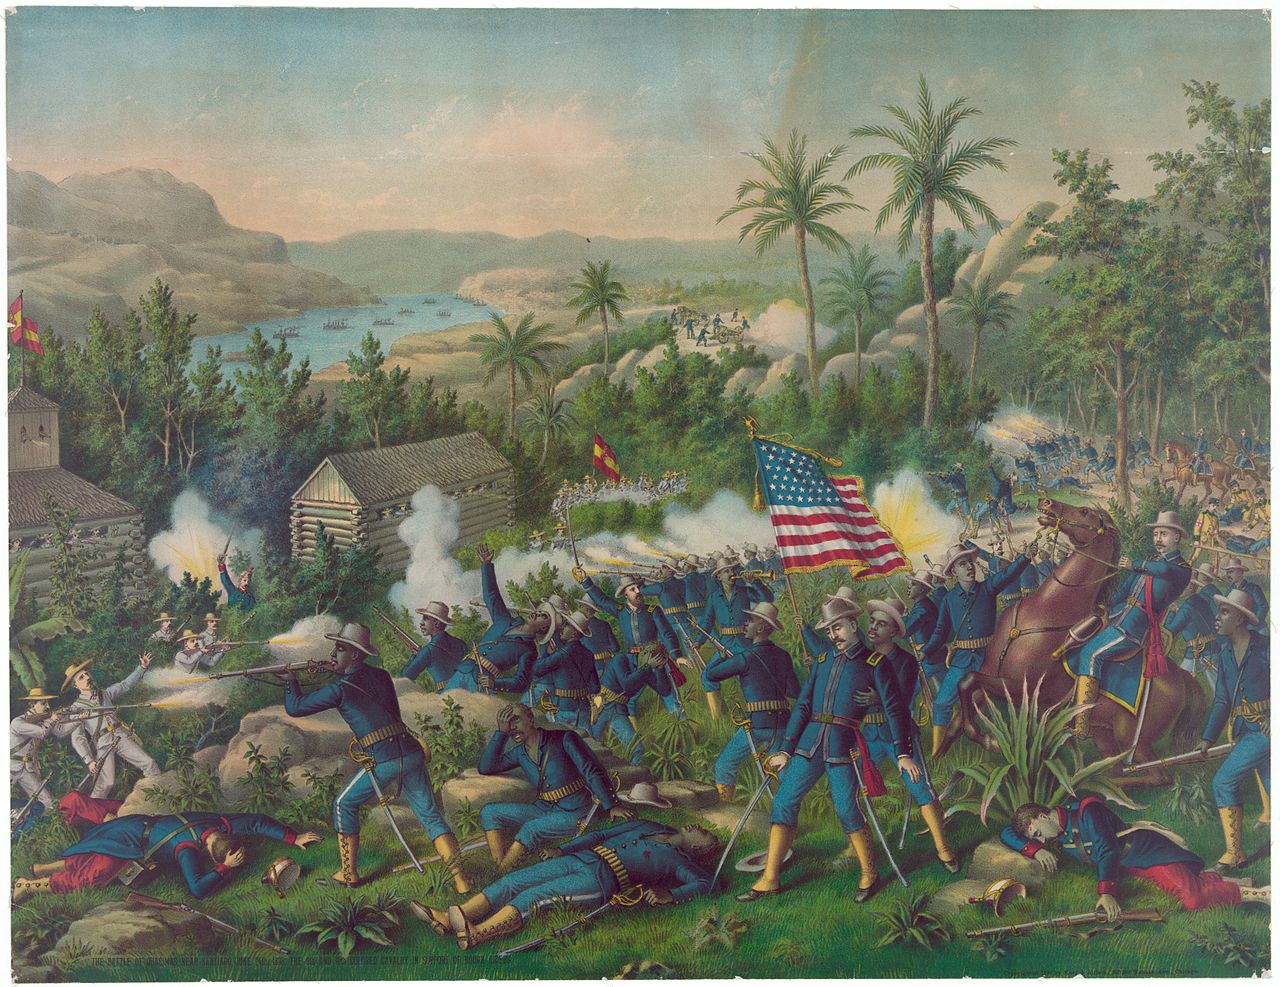 Museum of the American G.I in College Station, Texas - Image of a Painting of the Battle of Las Guasimas near Santiago June 24th, 1898